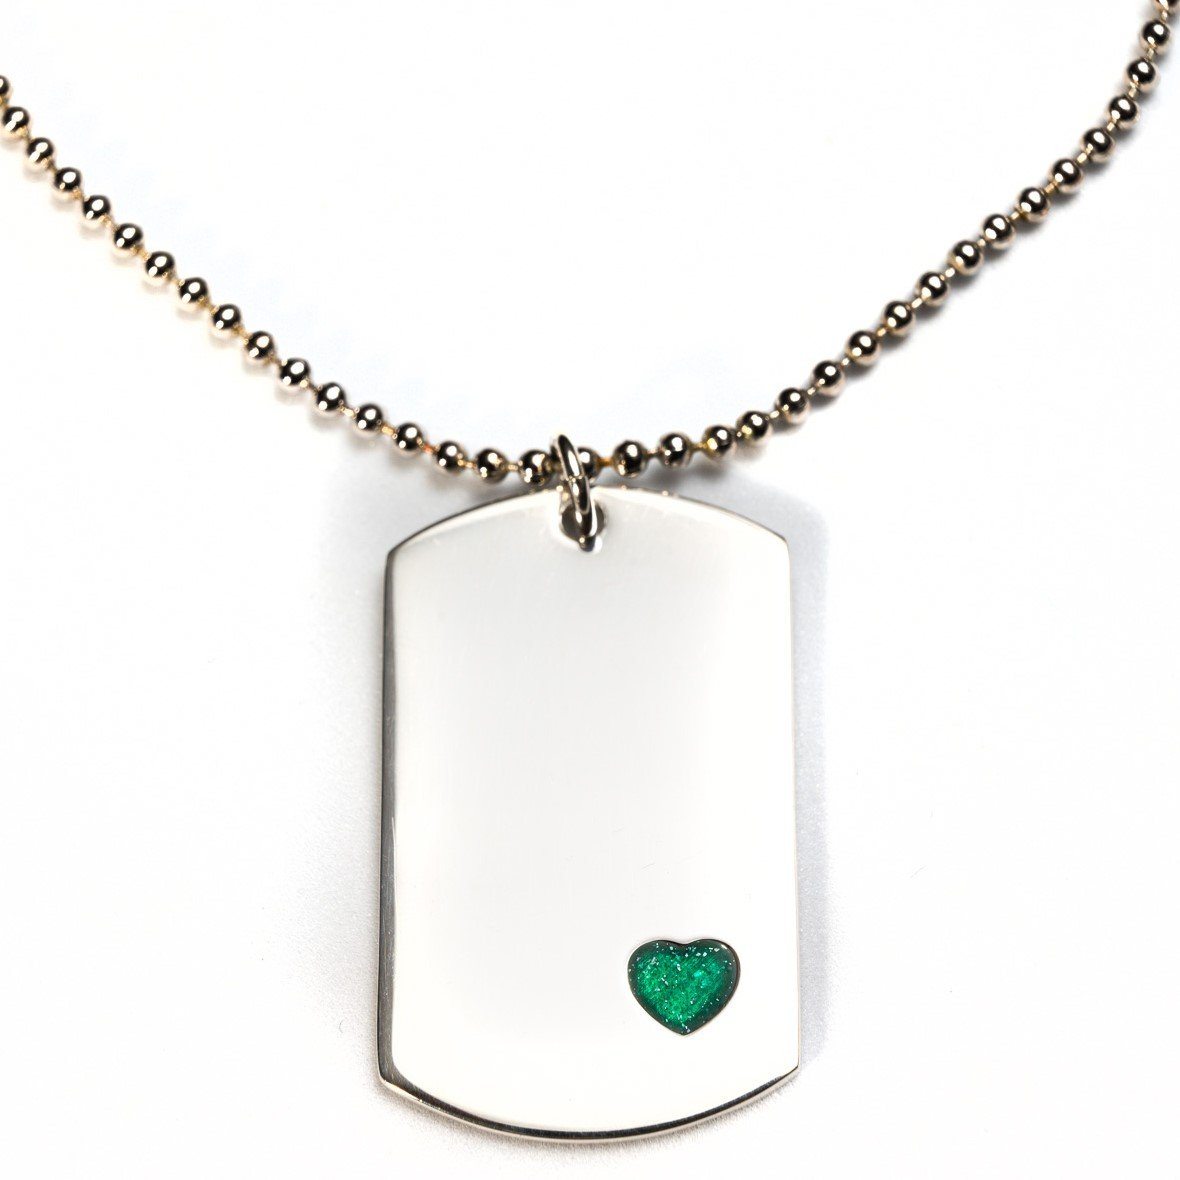 Sterling-Silver Dog Tag with Everence Inlay - Large Everence Emerald 